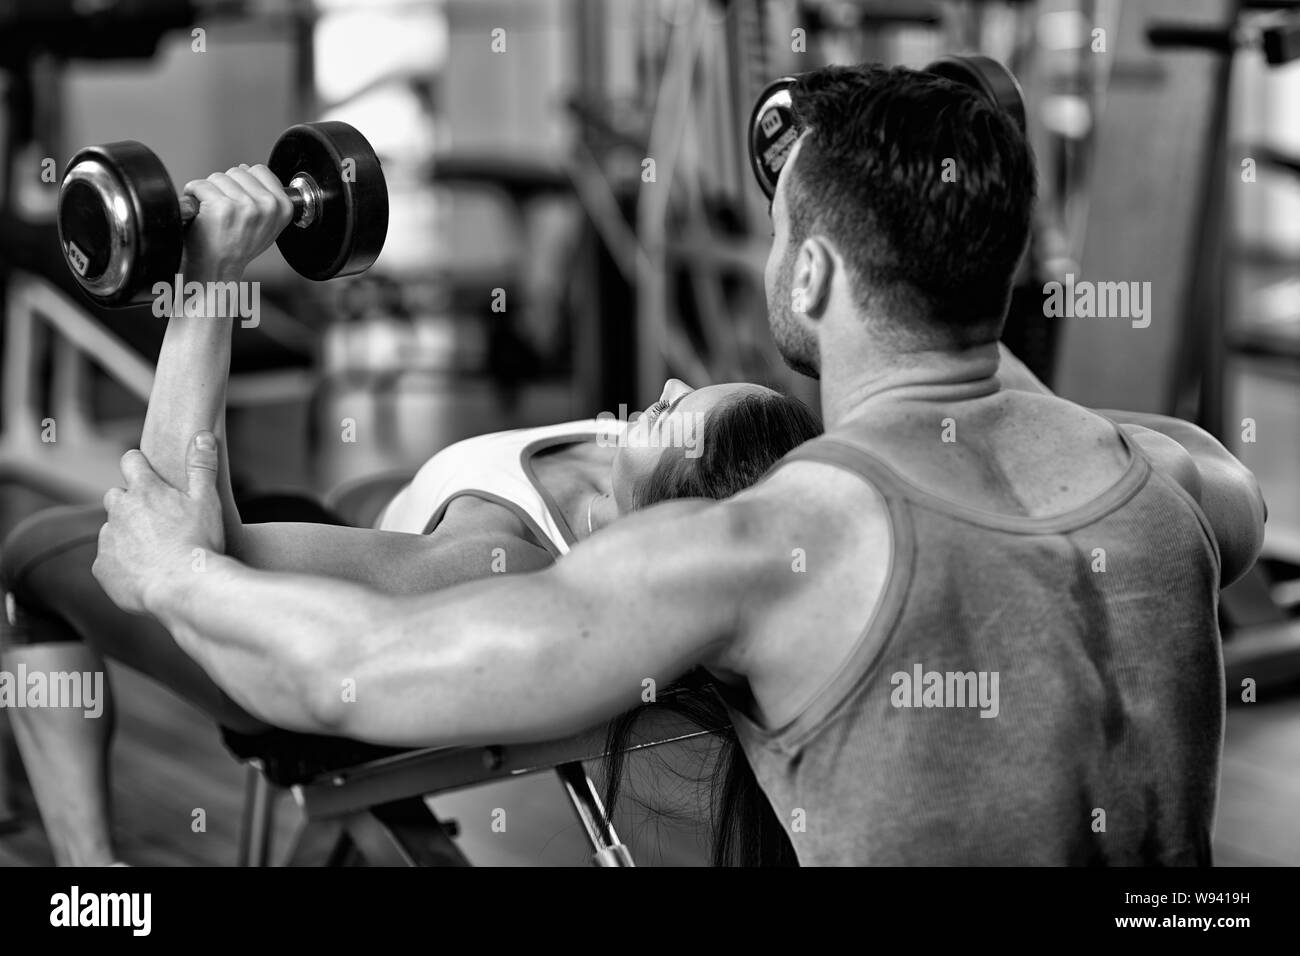 Personal trainer helping woman working with dumbbells Stock Photo